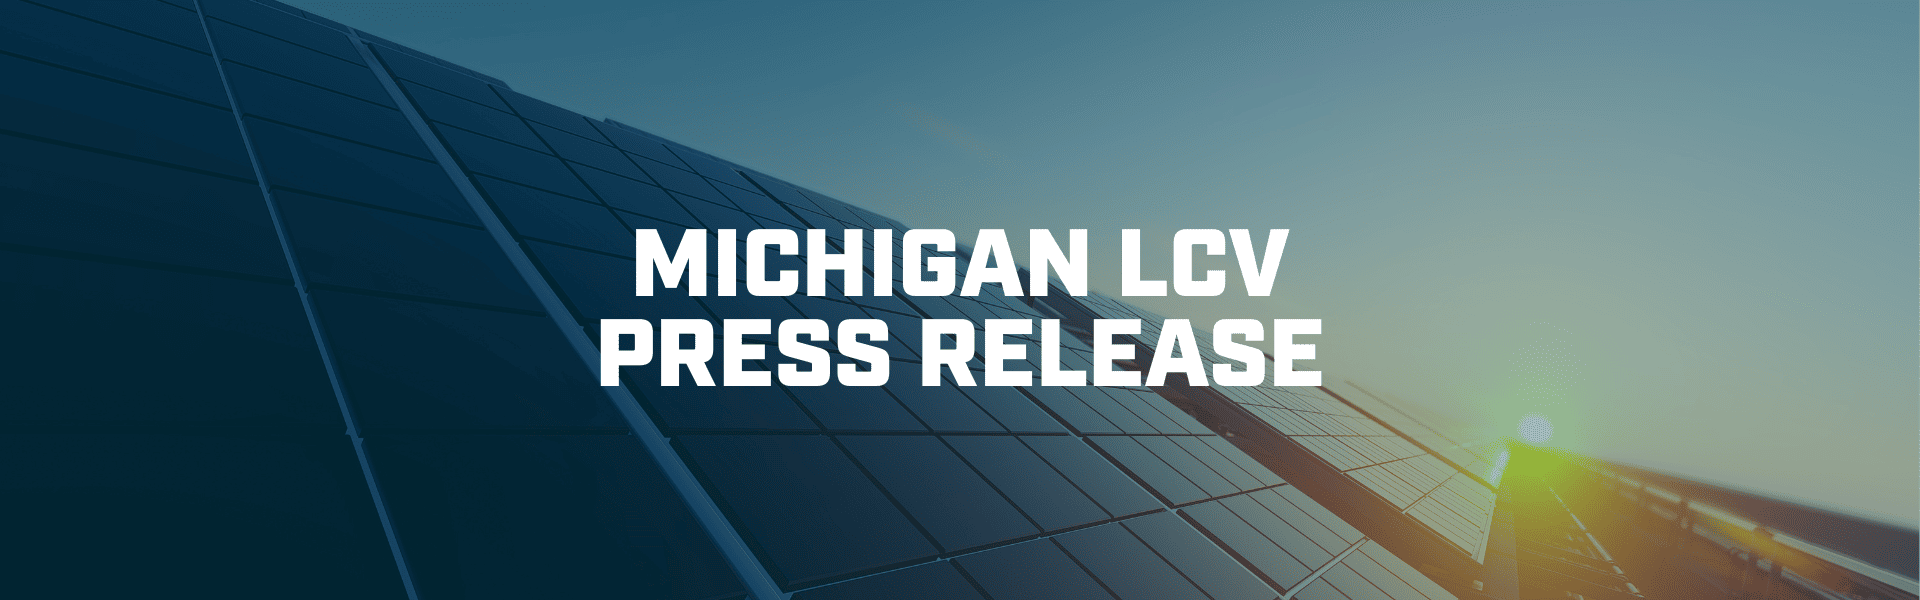 League of Conservation Voters Releases National Environmental Scorecard For Michigan Delegation